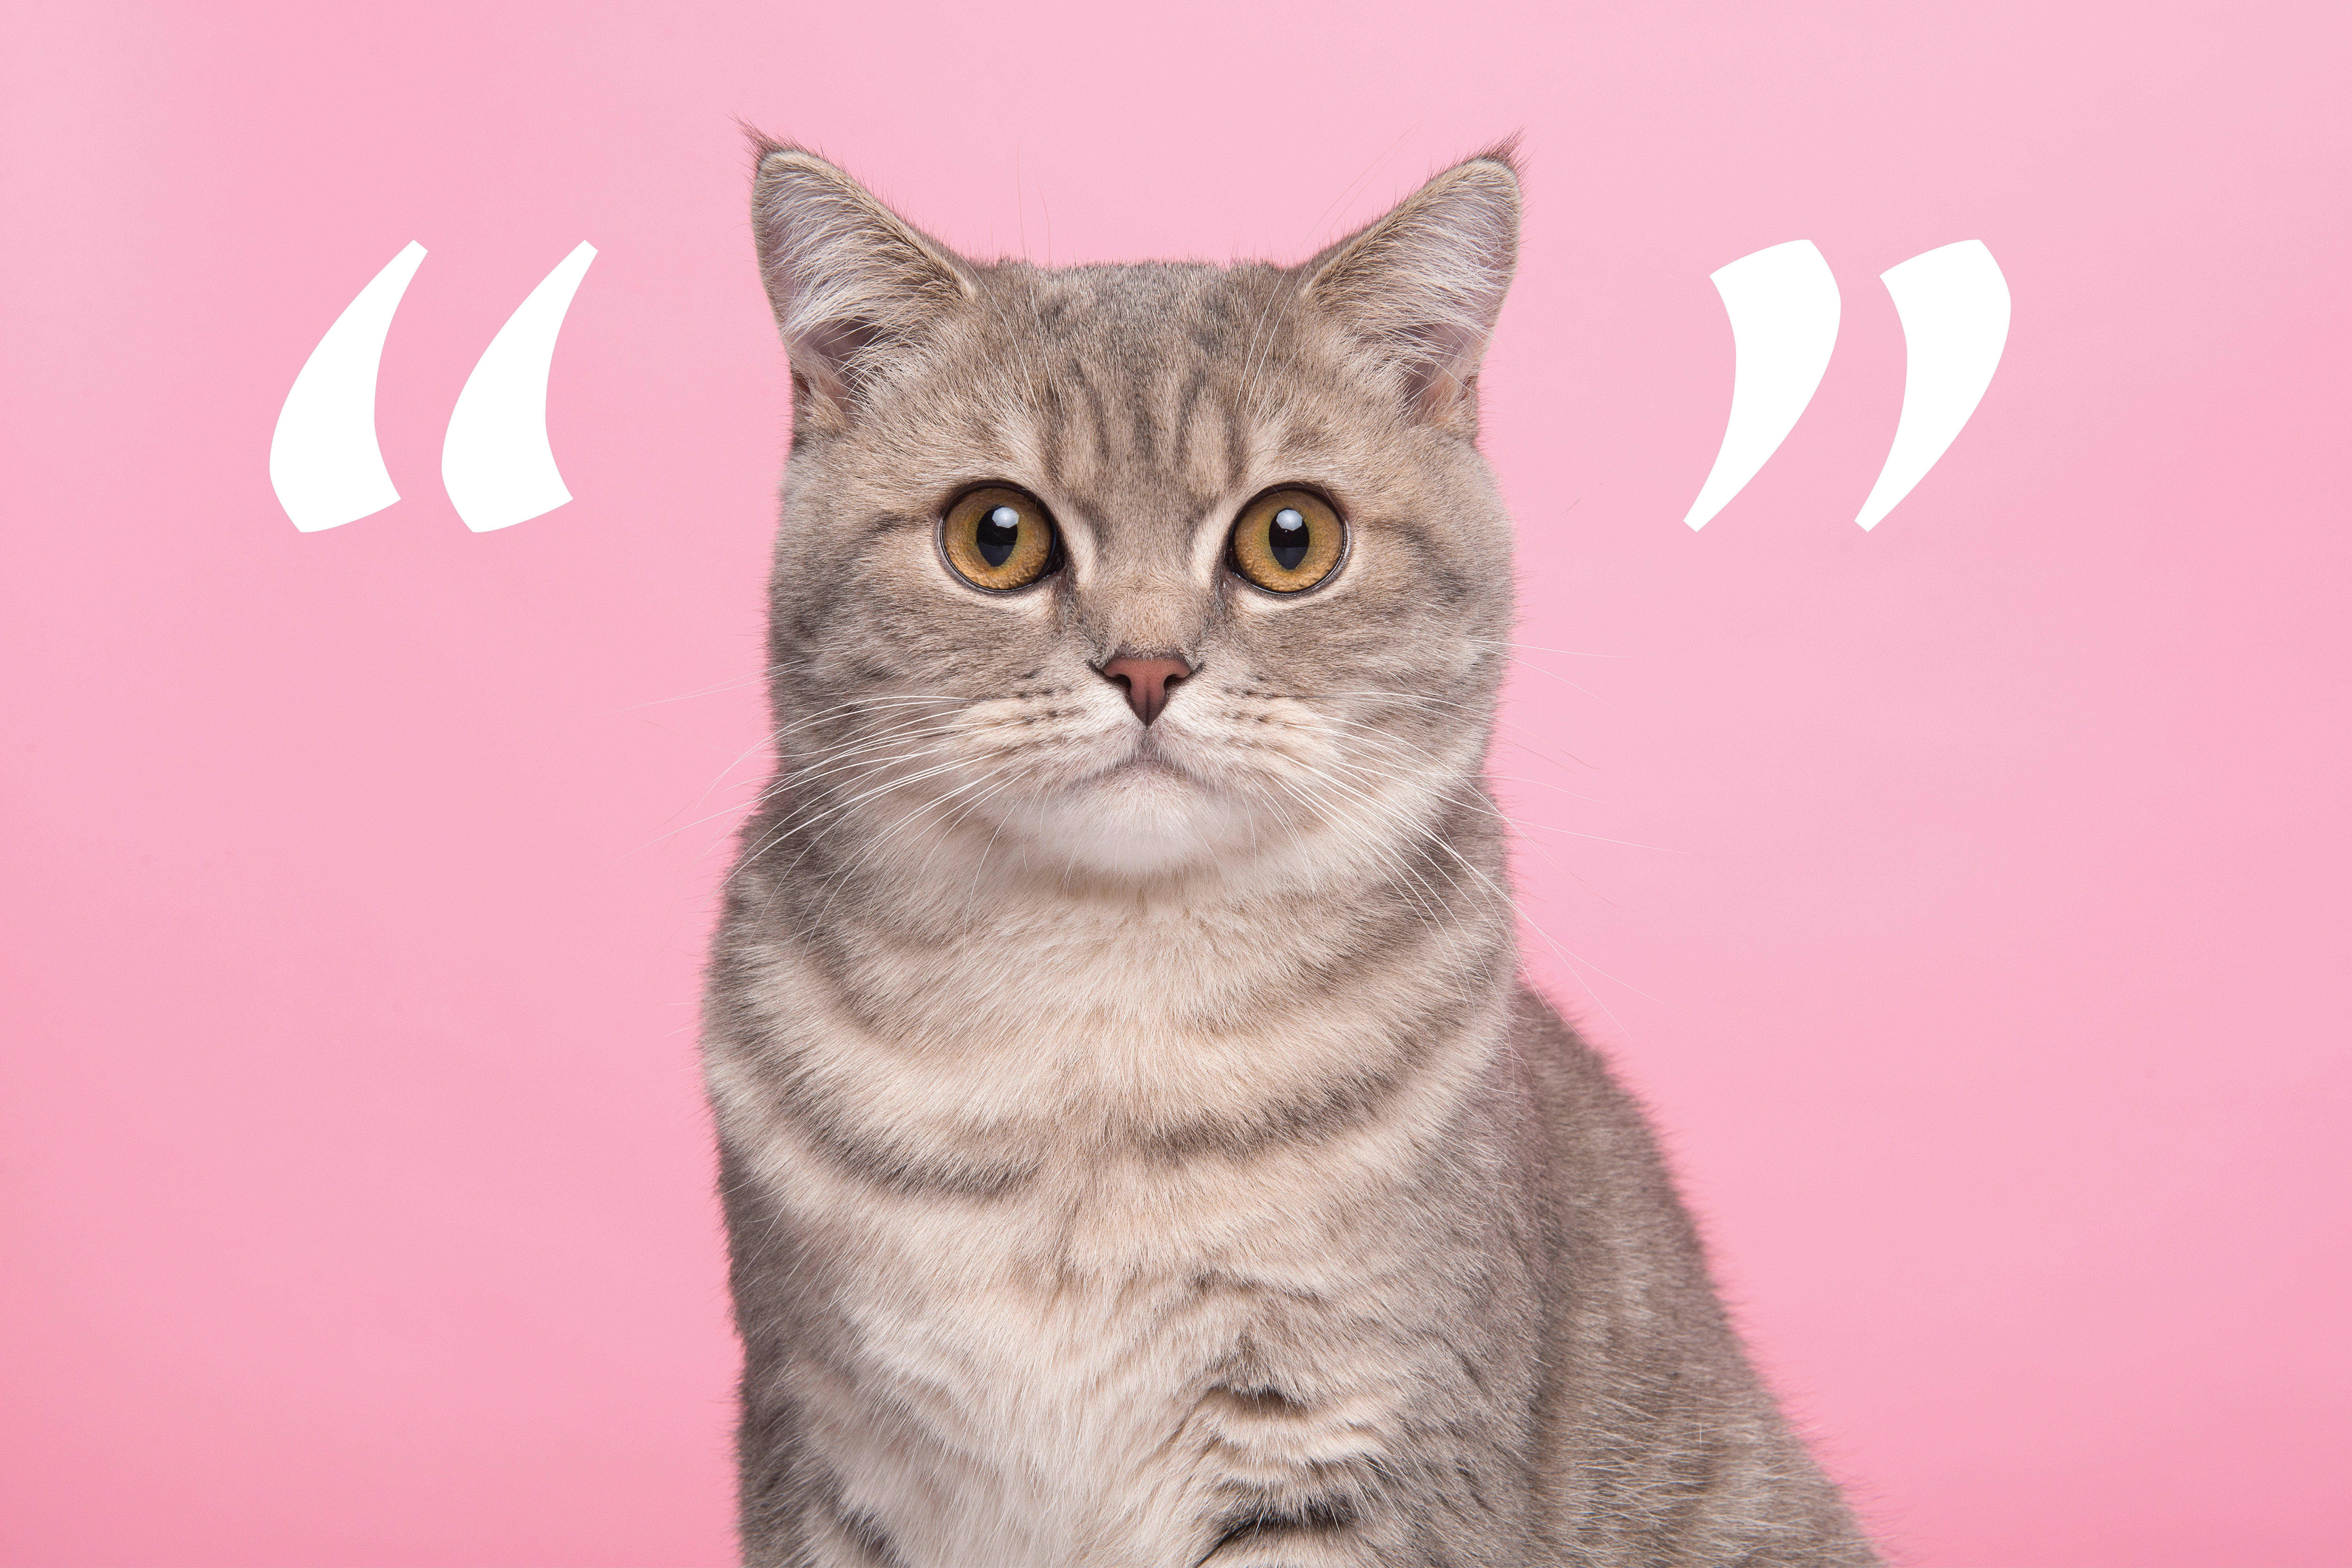 Cat on pink background with quotation marks around it